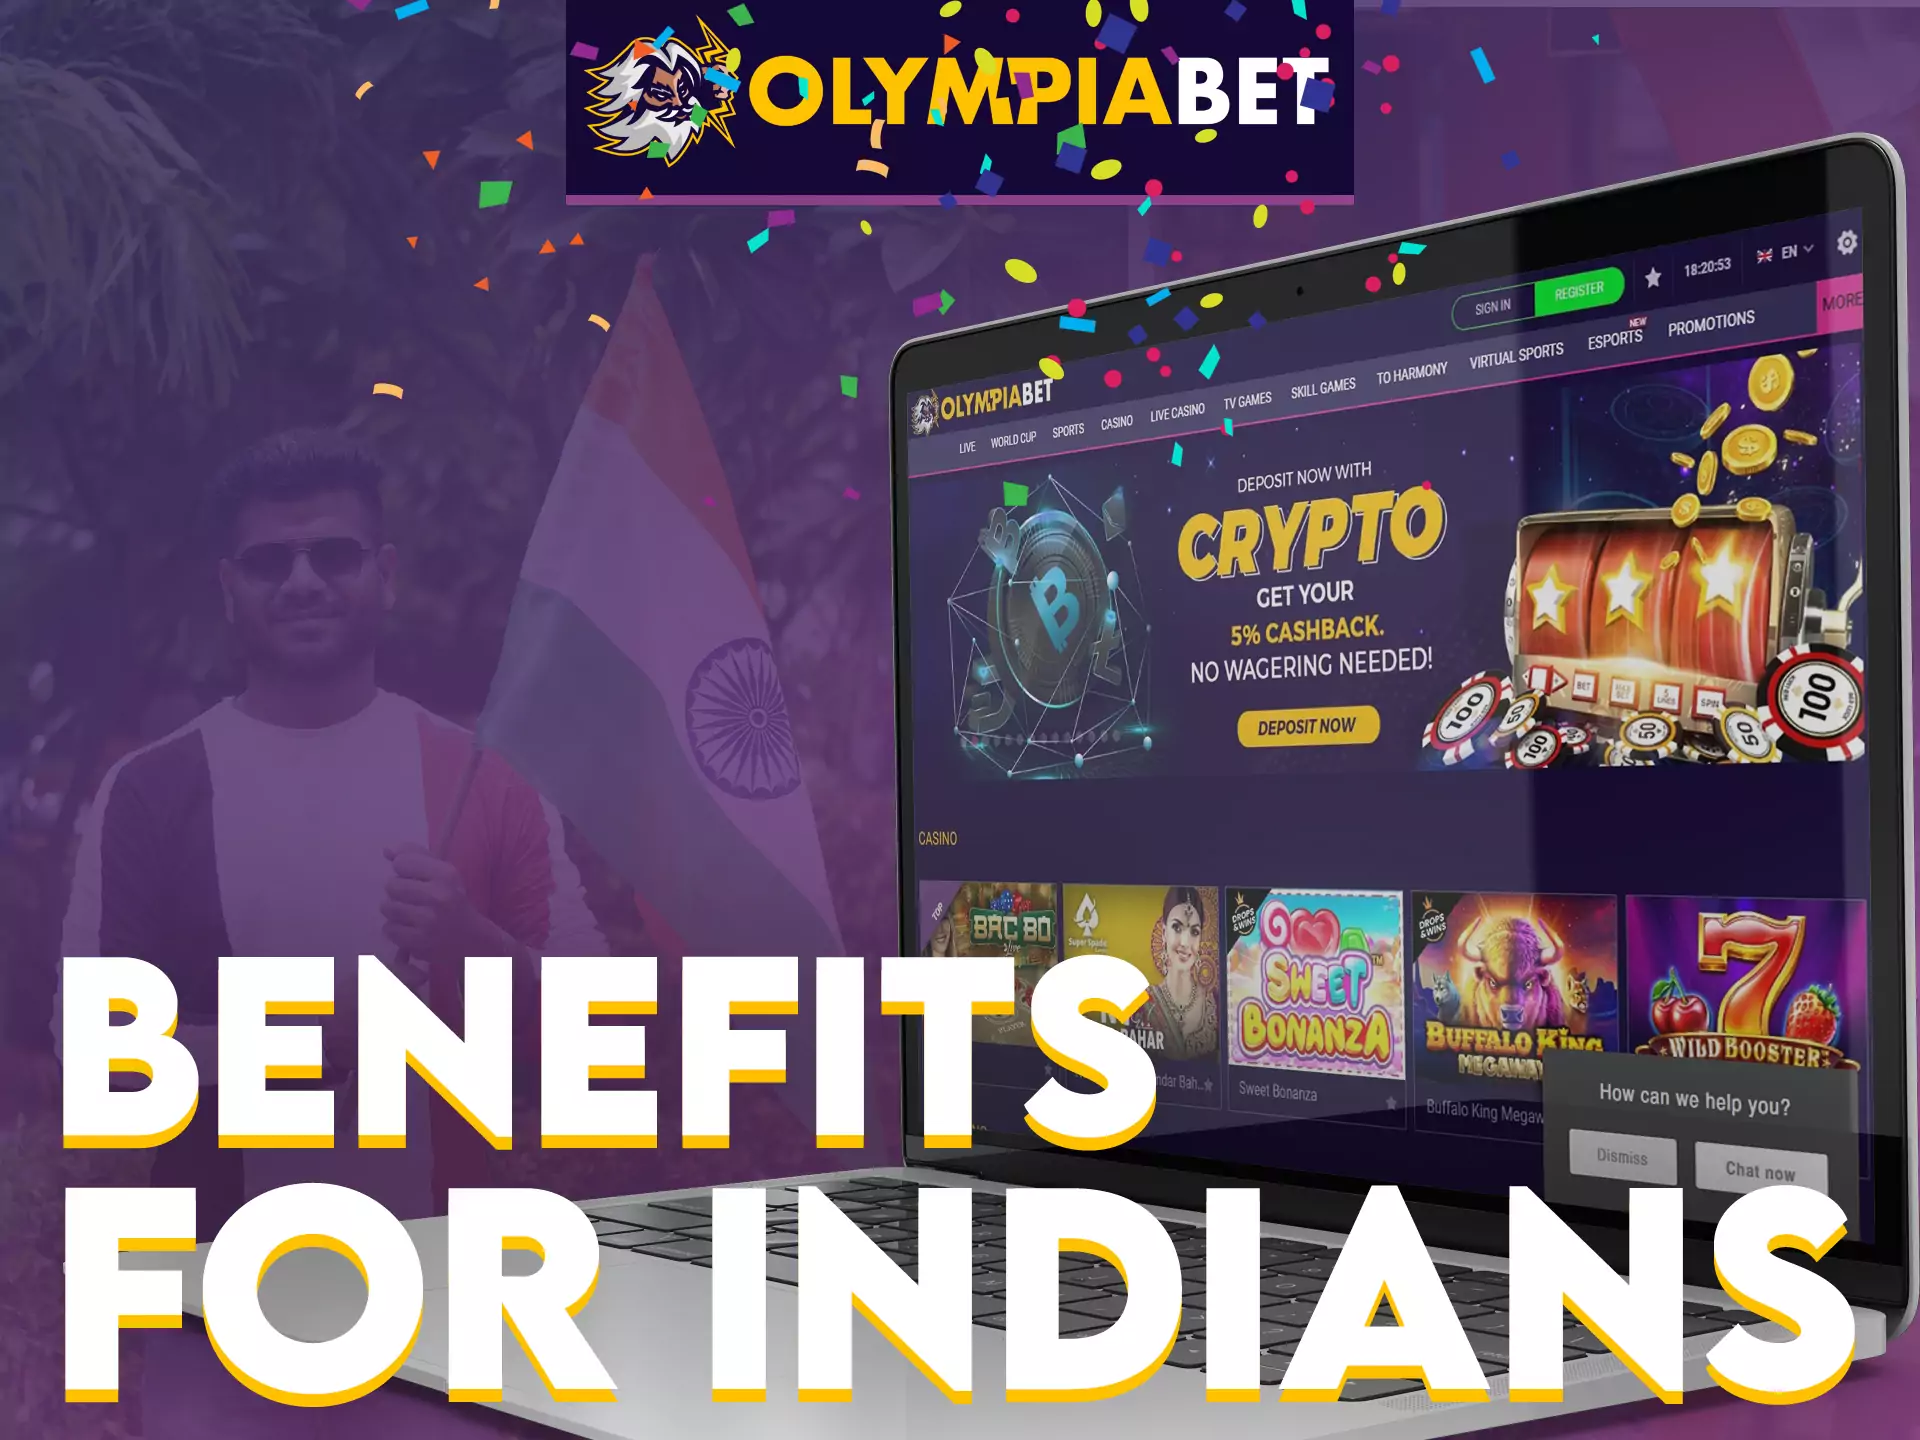 OlympiaBet offers interesting benefits to India players.